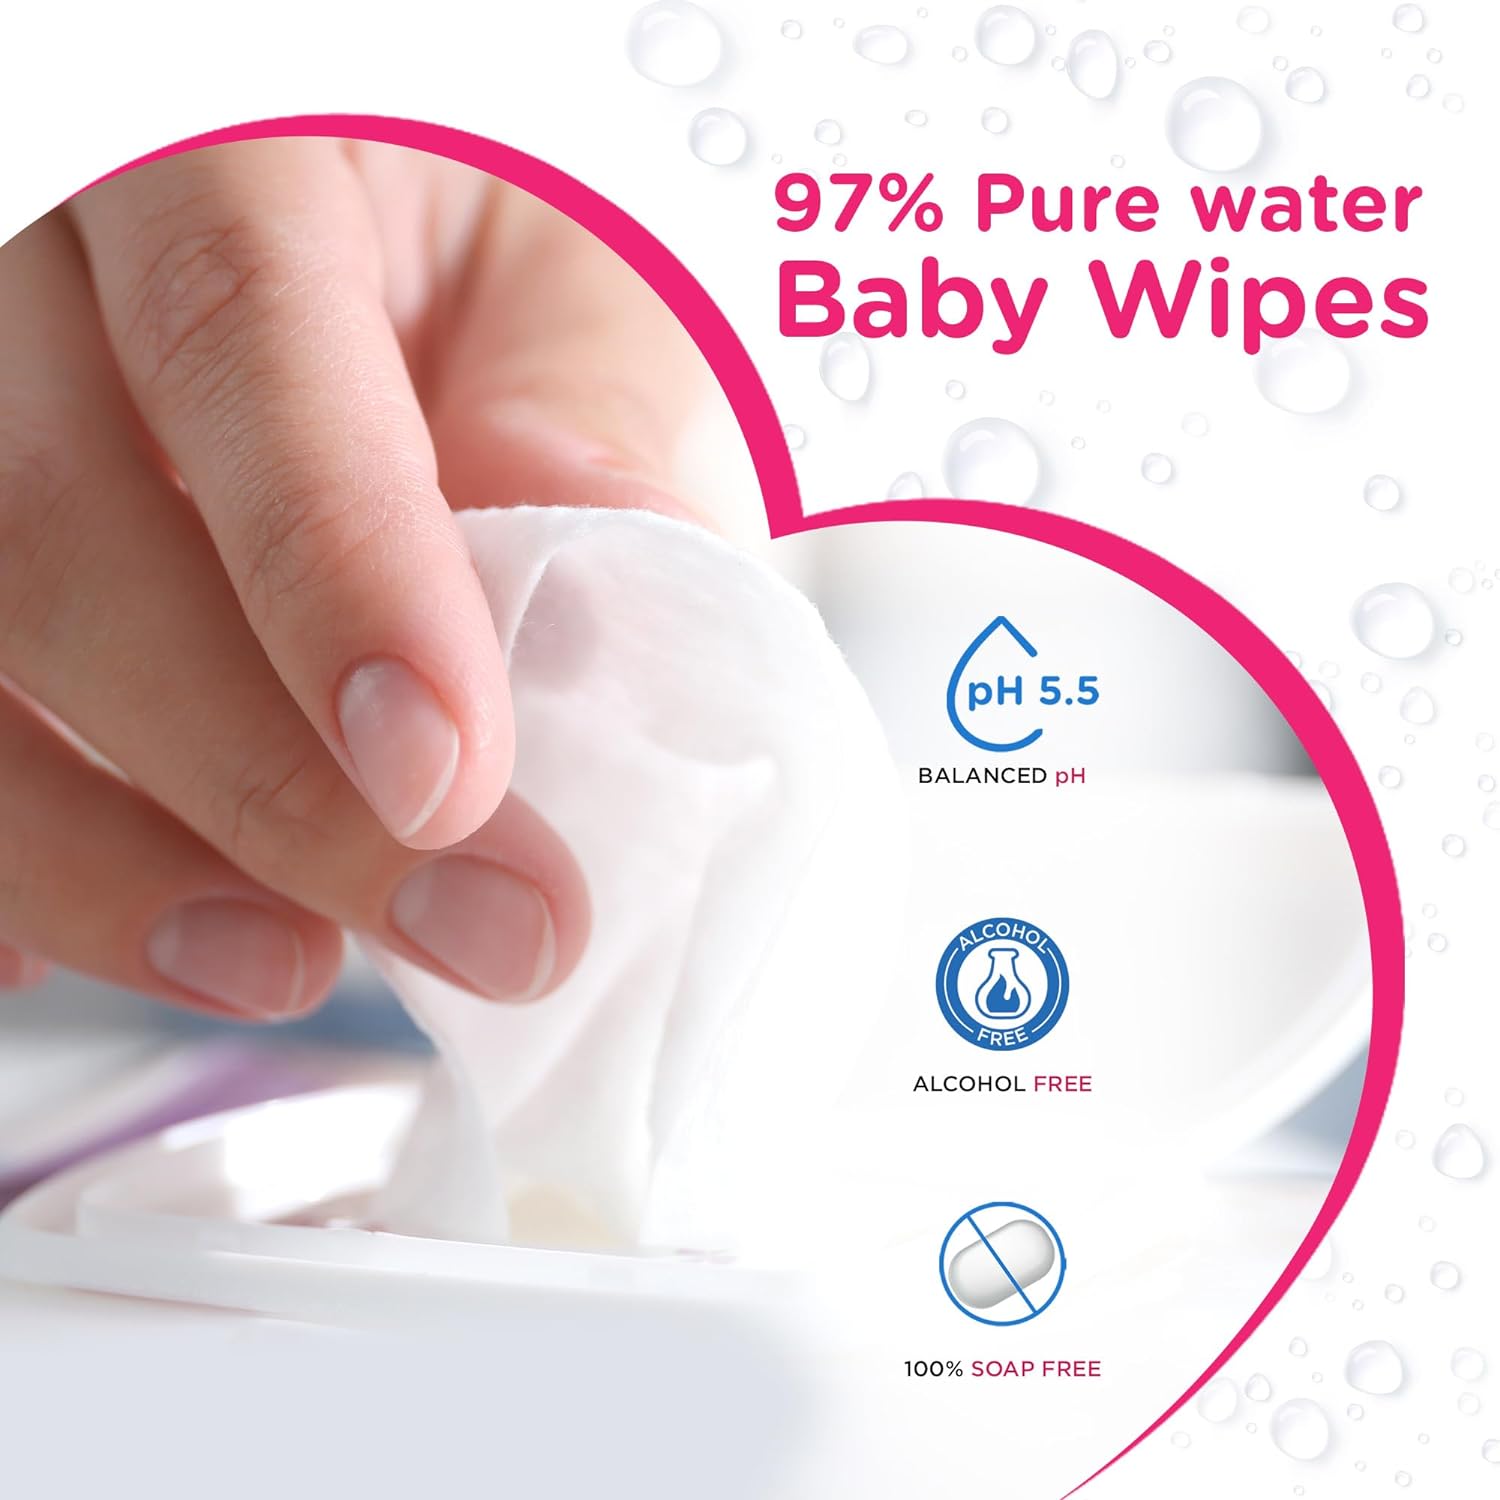 Buy Morisons Water Wipes with Aloe vera for your Baby - 72pcs Online in India at uyyaala.com